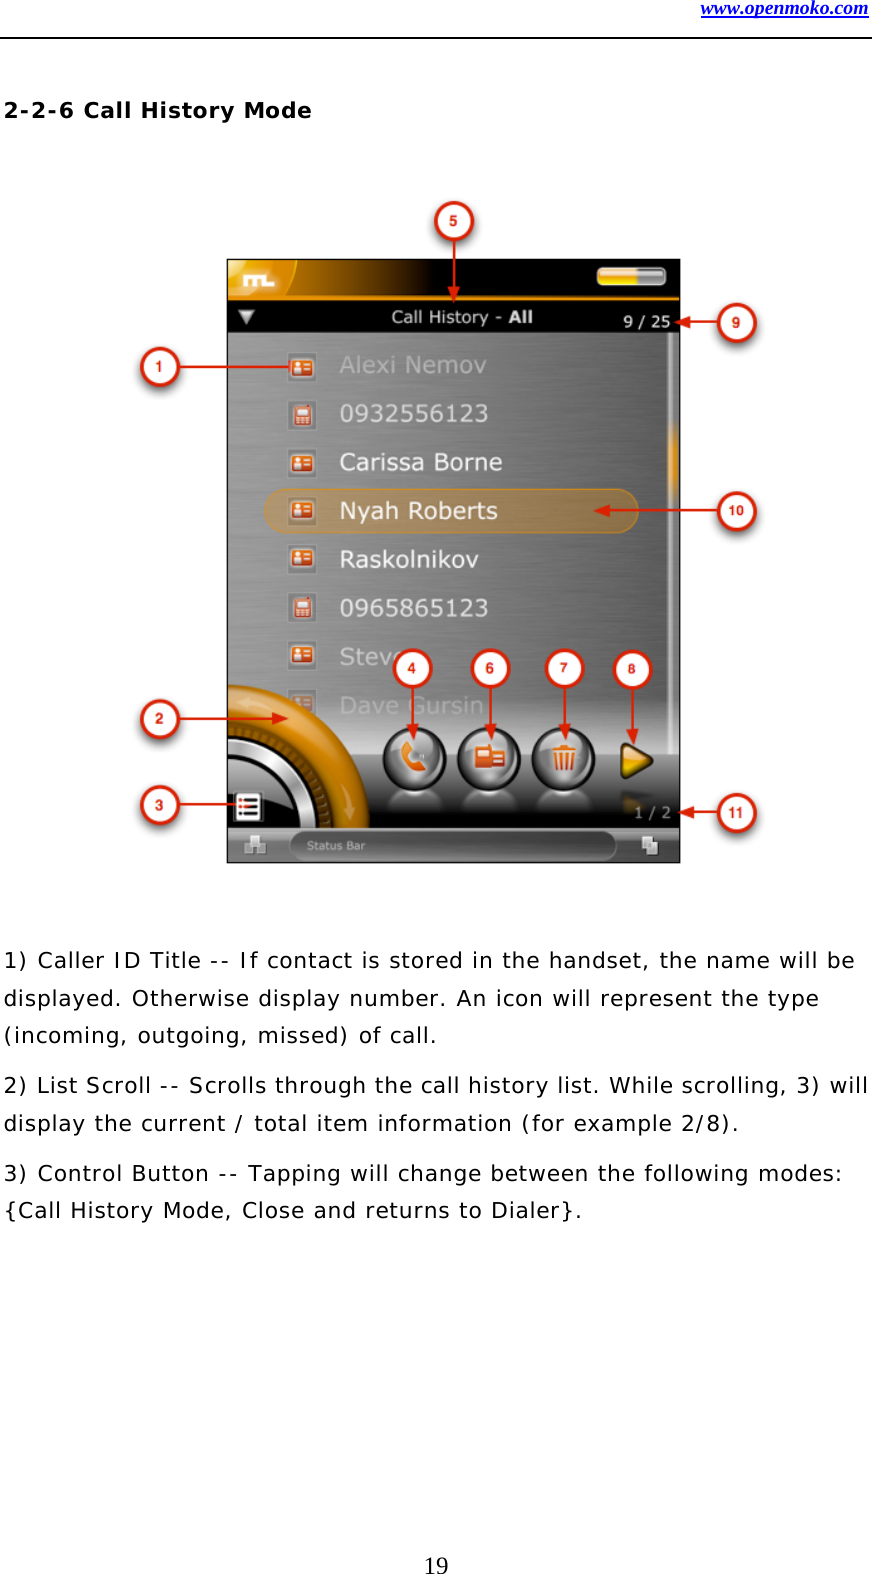 www.openmoko.com 19  2-2-6 Call History Mode                    1) Caller ID Title -- If contact is stored in the handset, the name will be displayed. Otherwise display number. An icon will represent the type (incoming, outgoing, missed) of call.  2) List Scroll -- Scrolls through the call history list. While scrolling, 3) will display the current / total item information (for example 2/8).  3) Control Button -- Tapping will change between the following modes: {Call History Mode, Close and returns to Dialer}.        